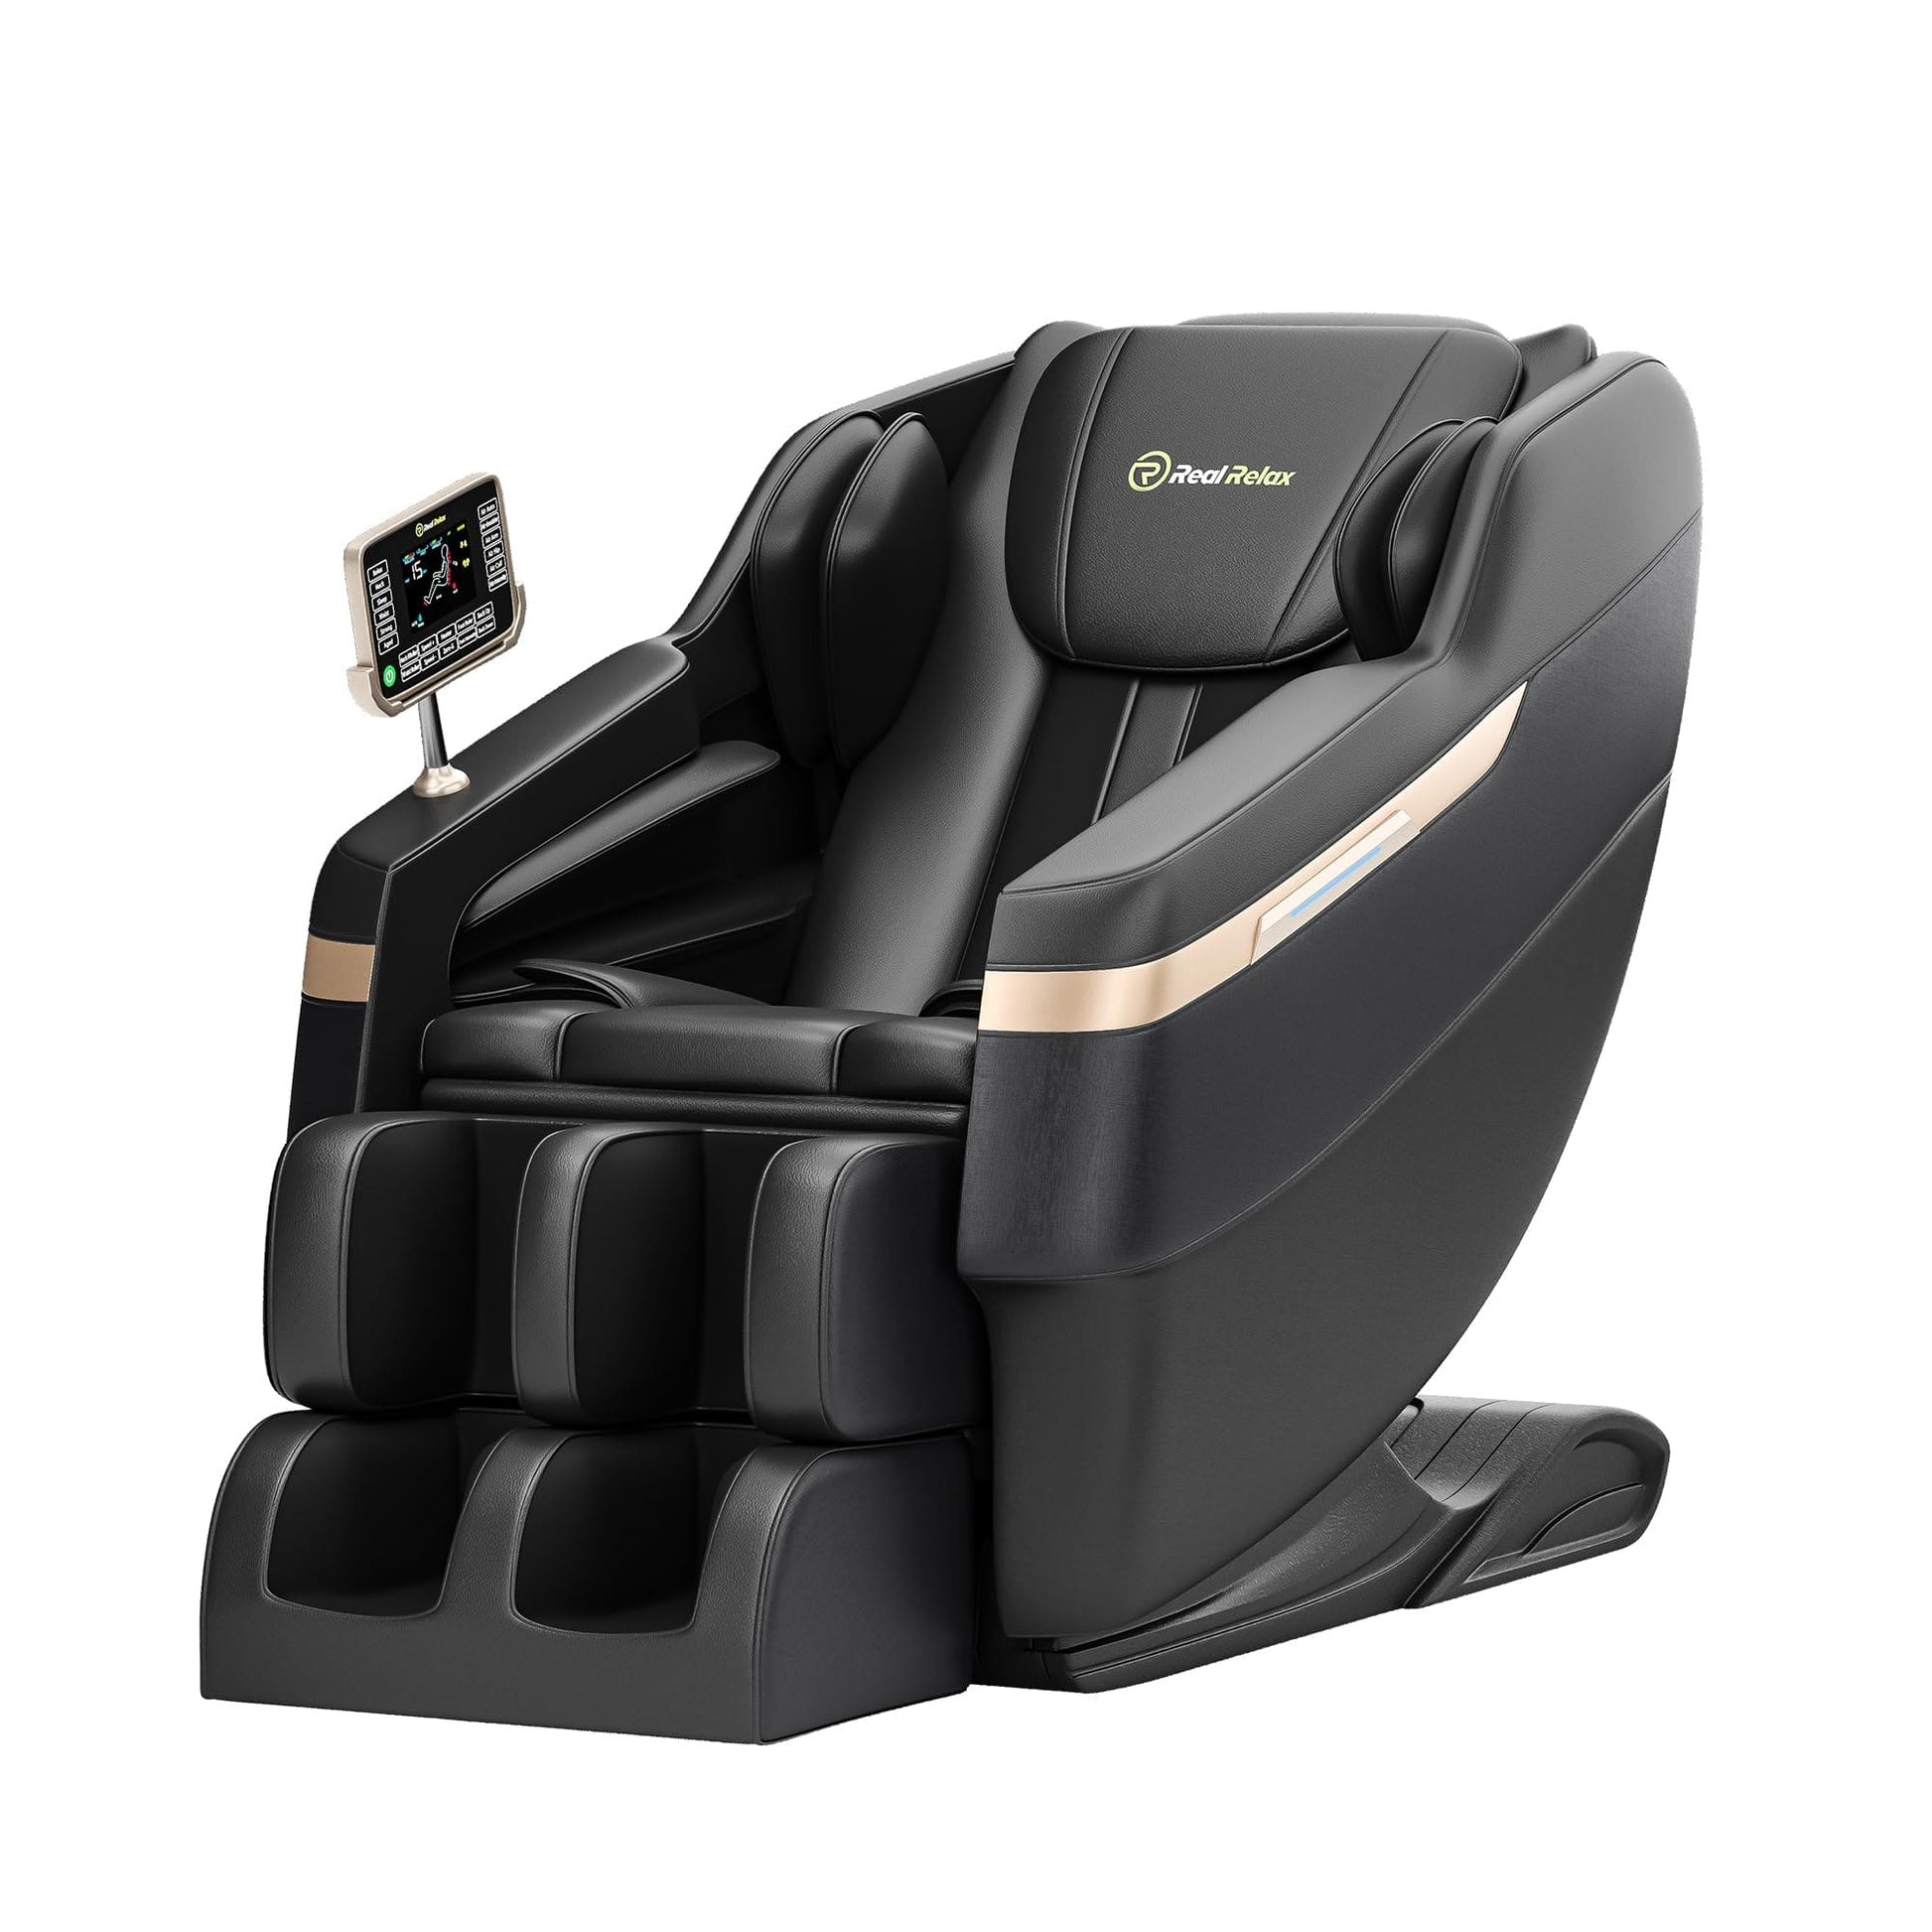 Real Relax Massage Chair BS-02 Massage Chair Black